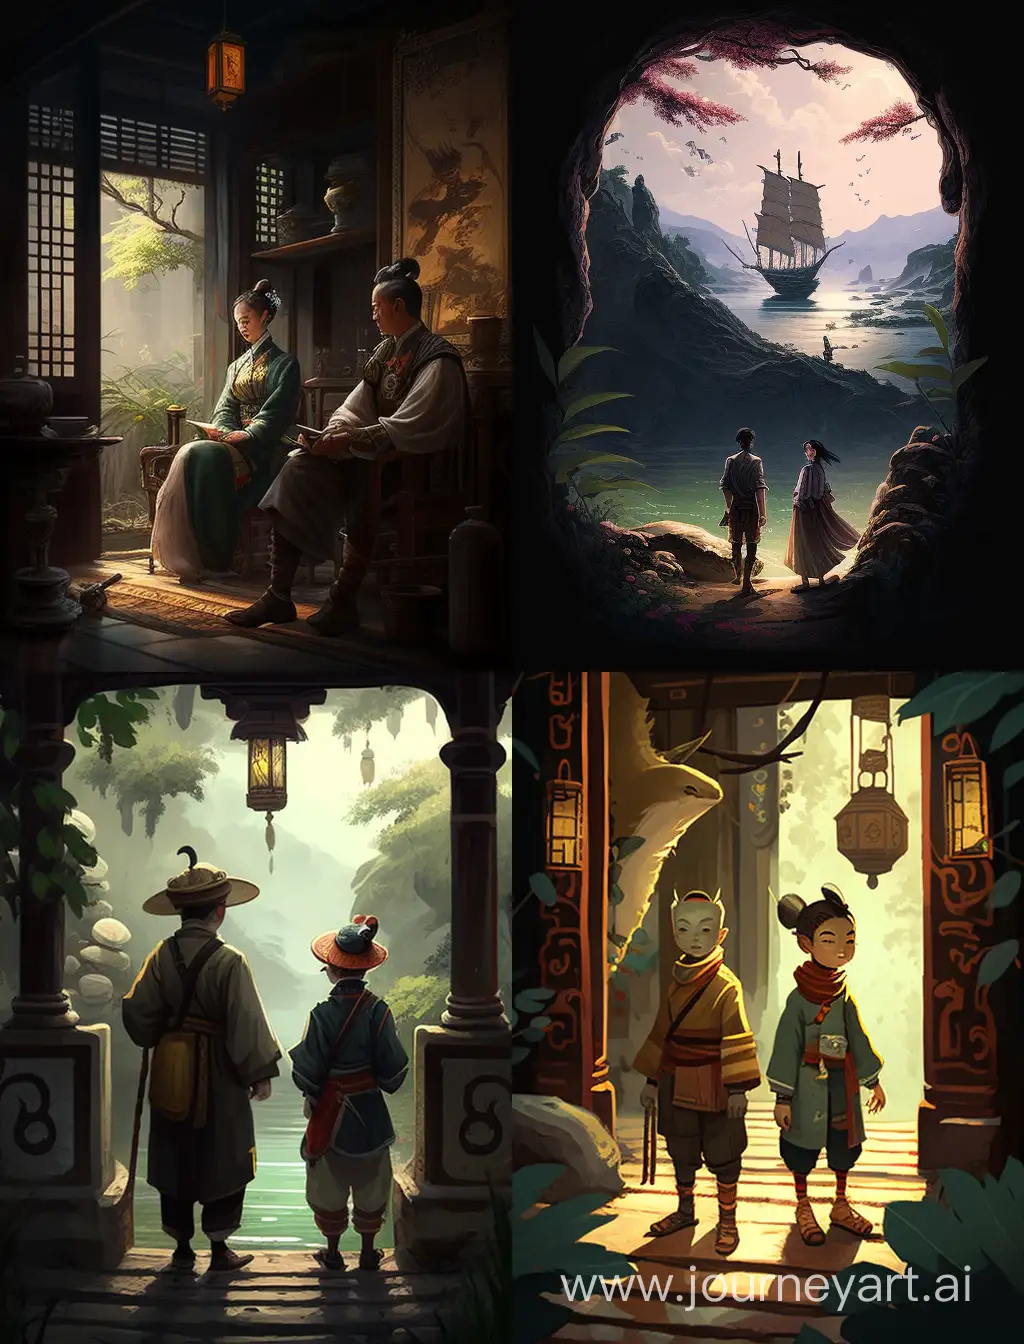 Xiao-Ming-and-Xiao-Hong-Adventure-Whimsical-Duo-in-a-43-Aspect-Ratio-Scene